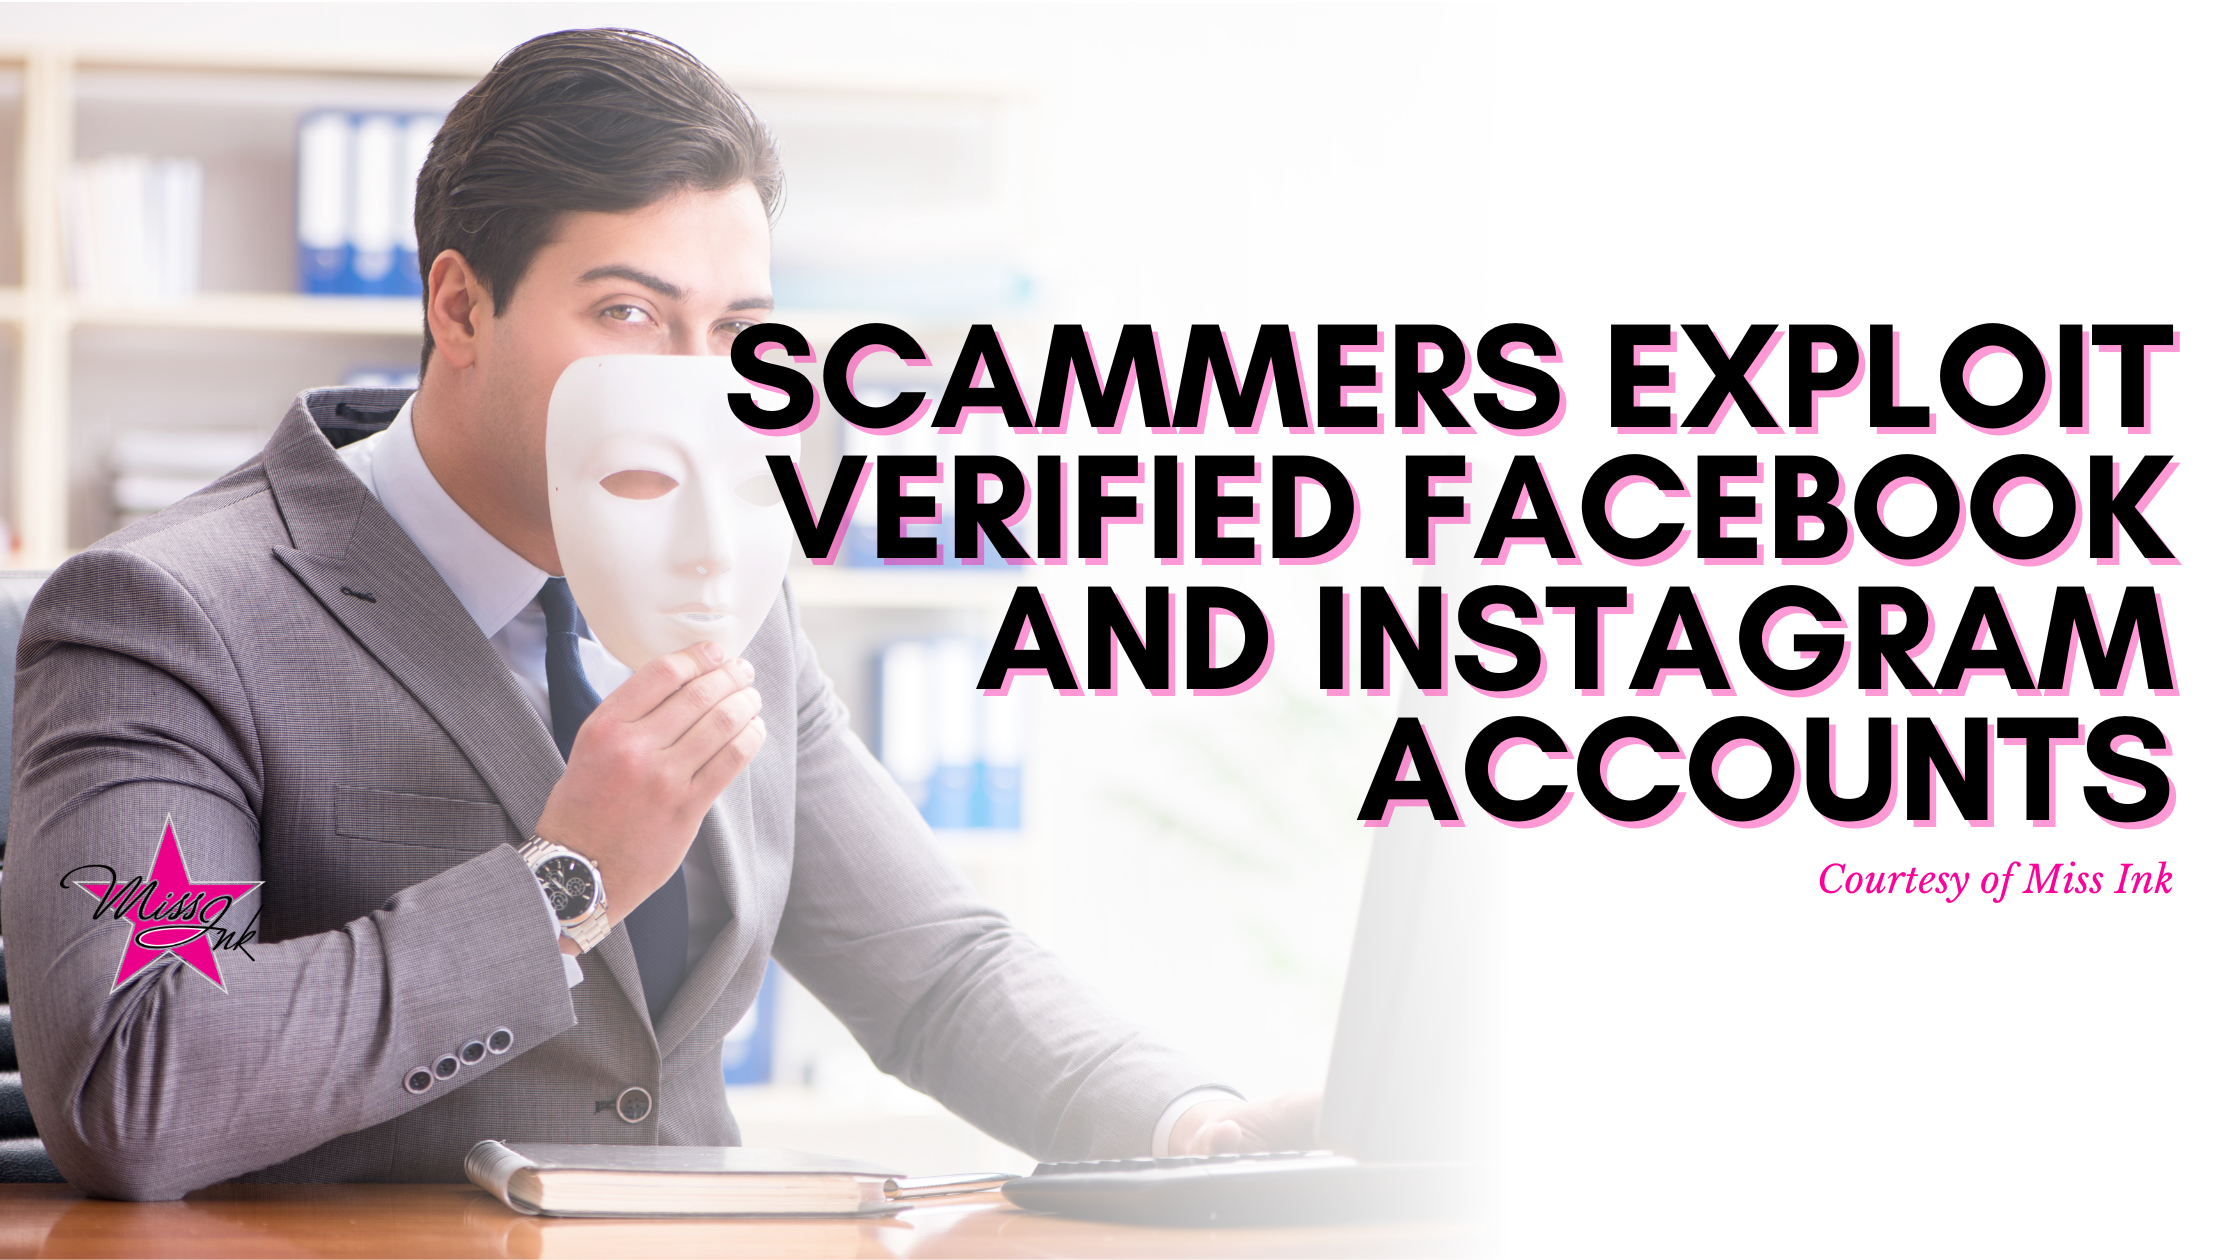 Scammers Exploit Verified Facebook and Instagram Accounts.